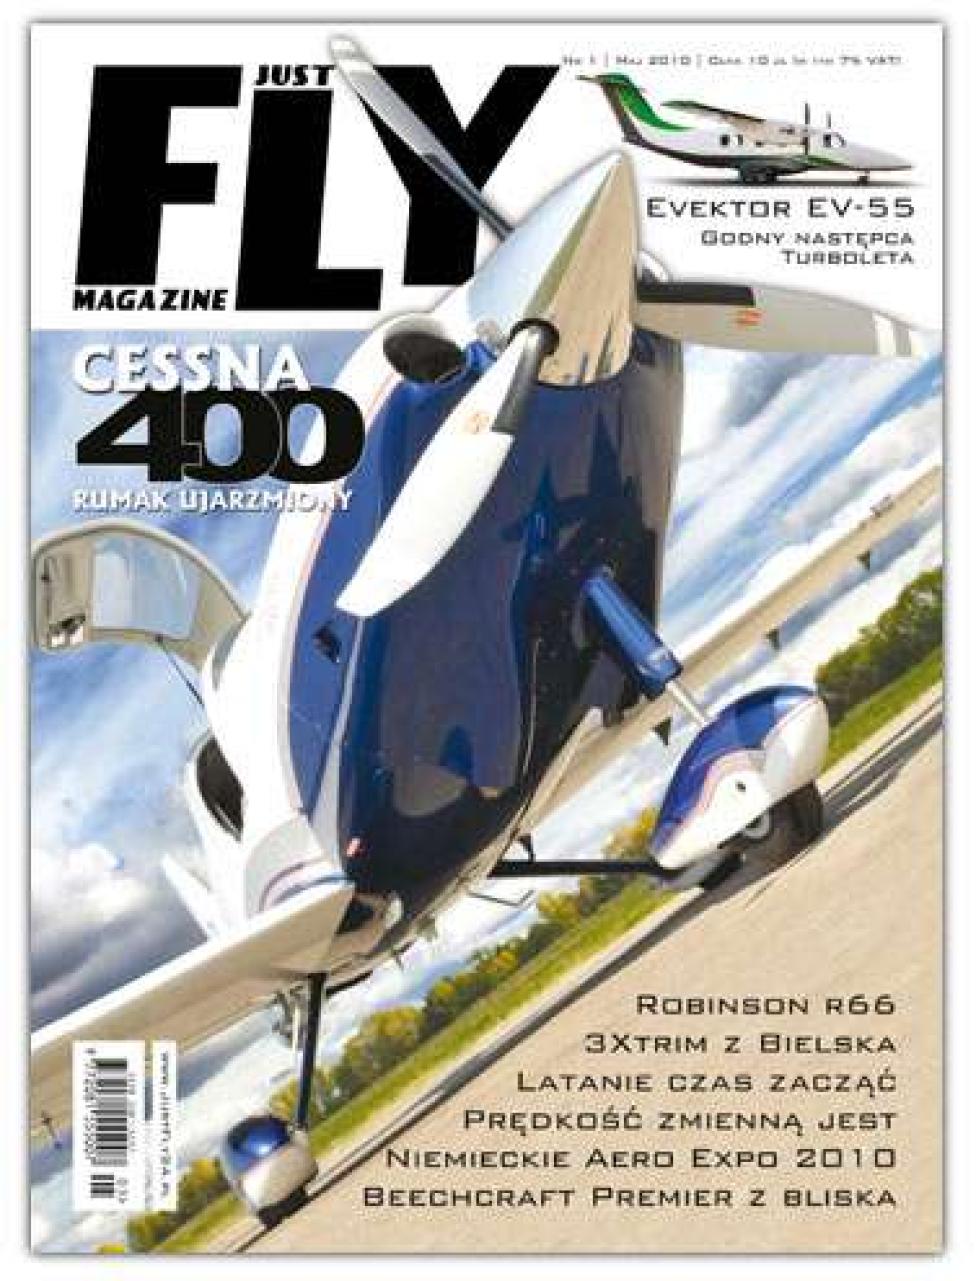 Just Fly Magazine 01/2010